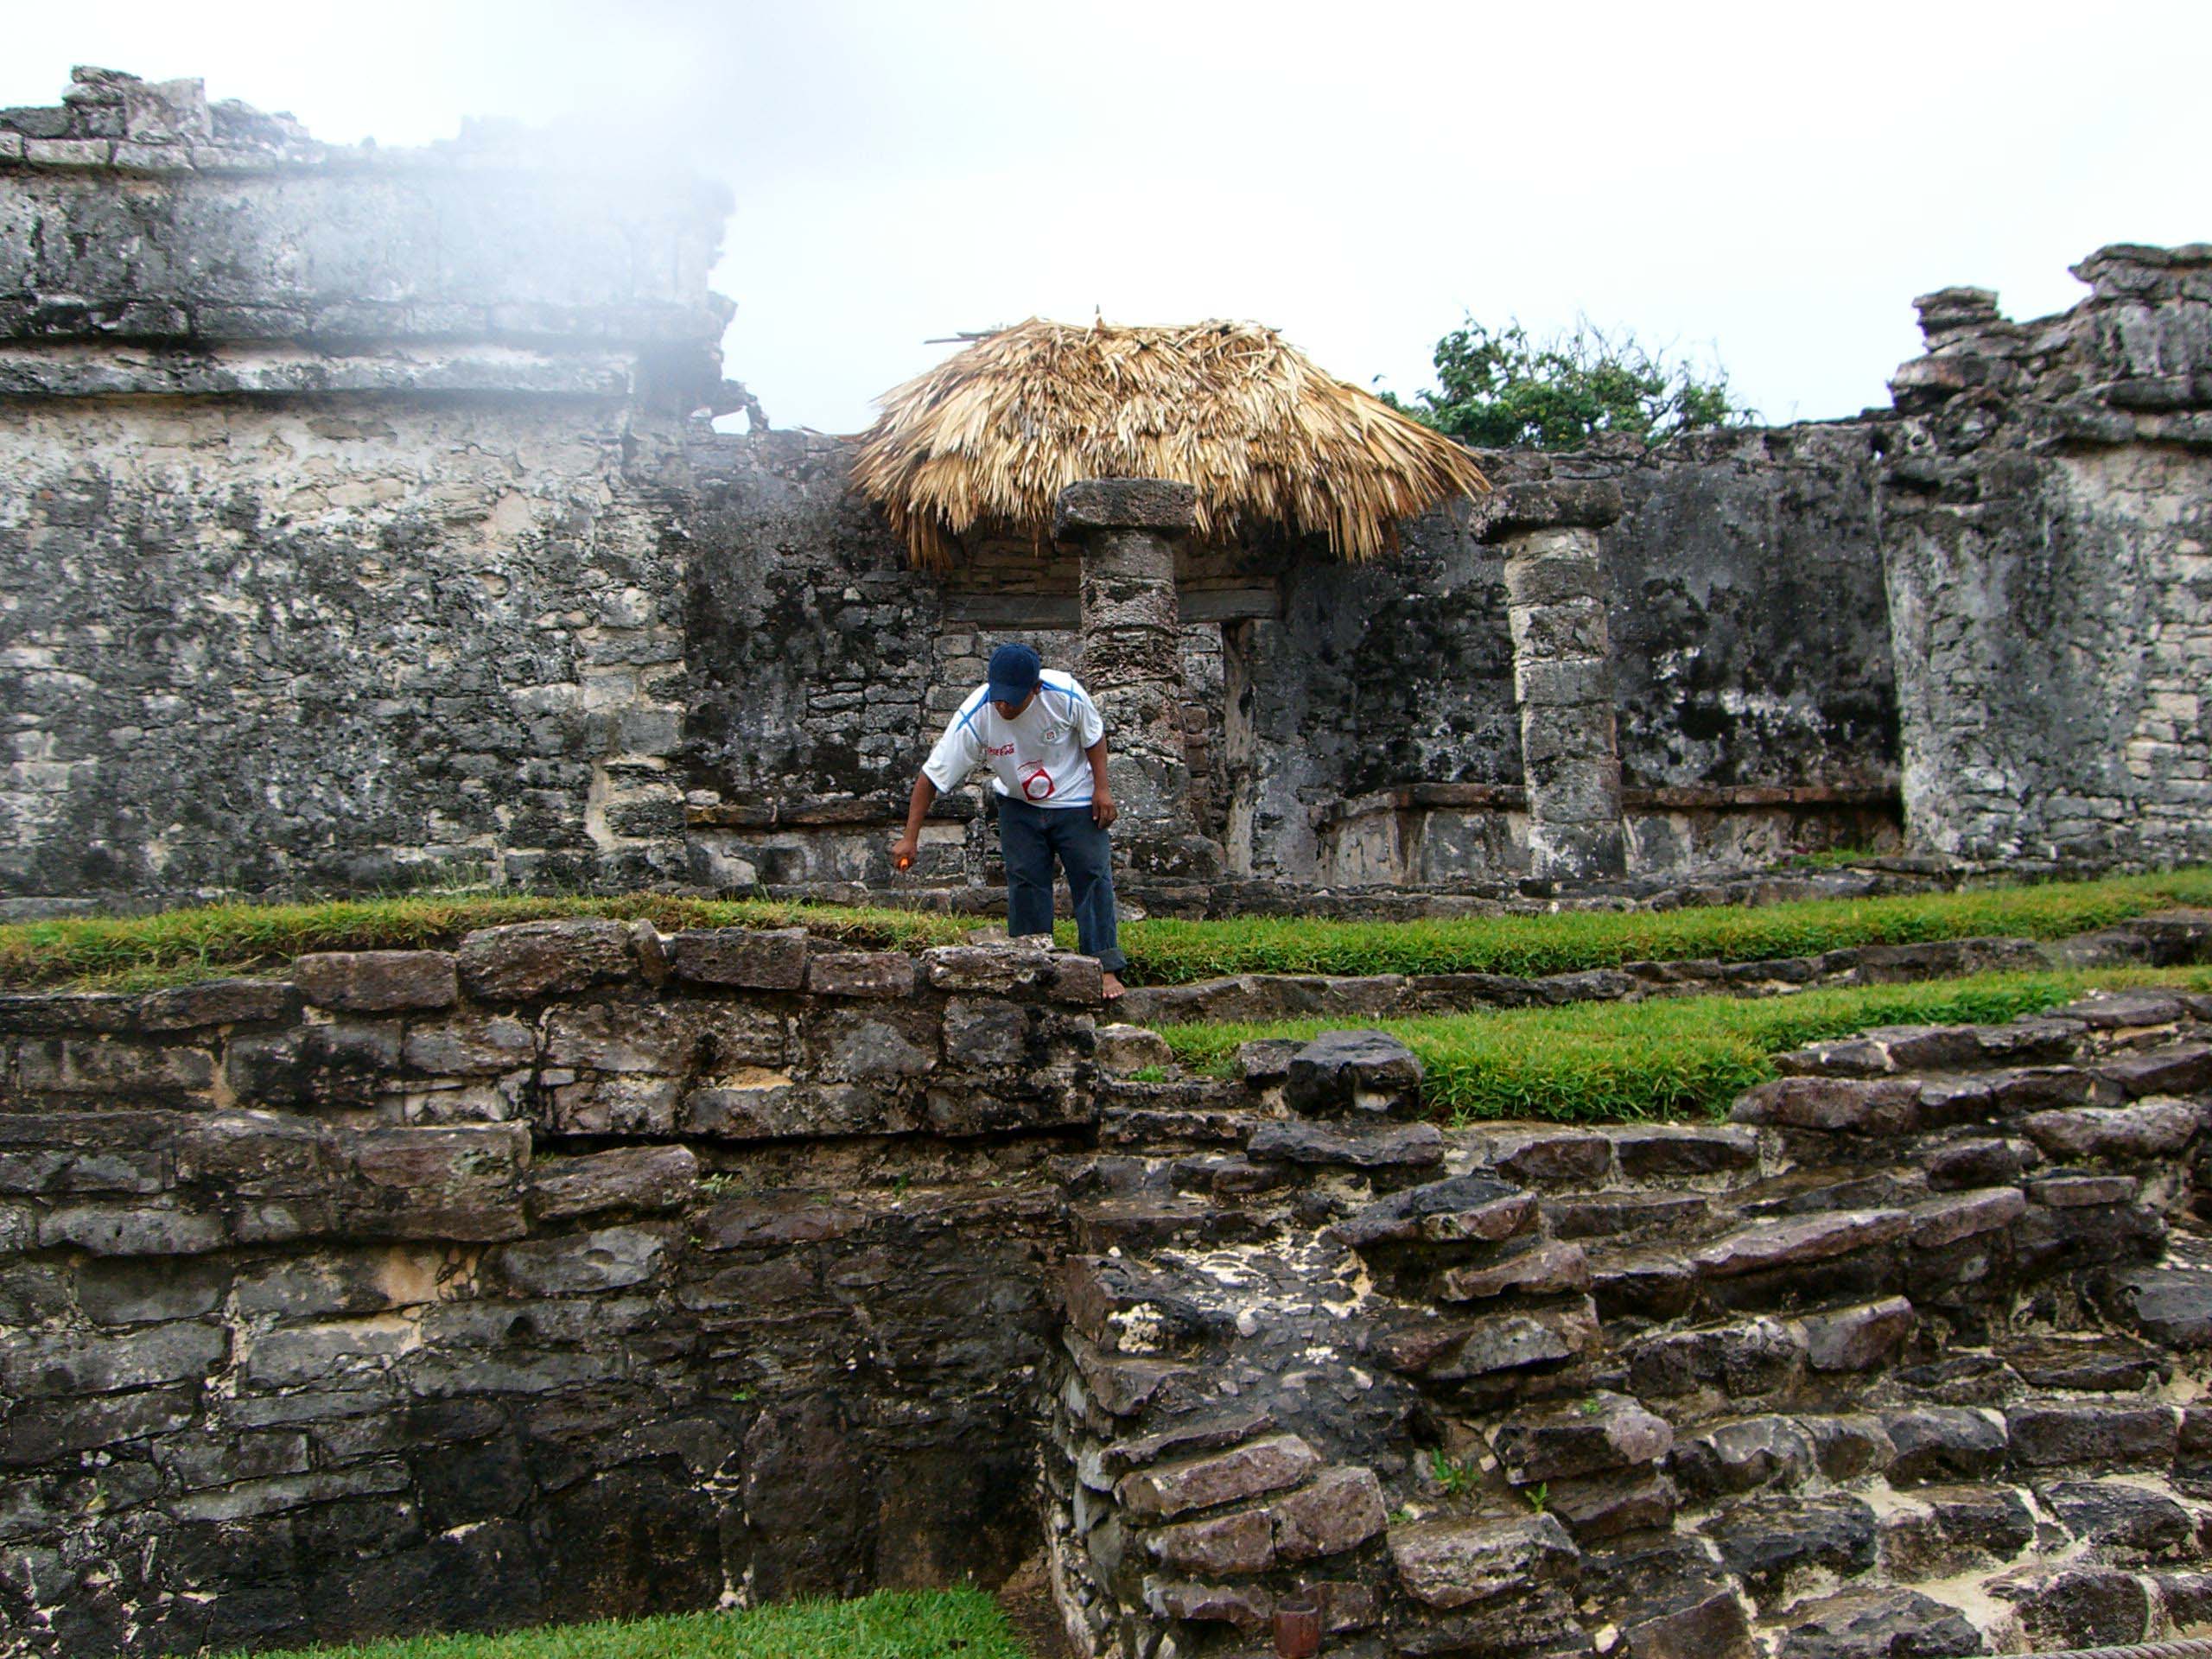 A building with a thatched roof in the Mayan ruins of Tulum